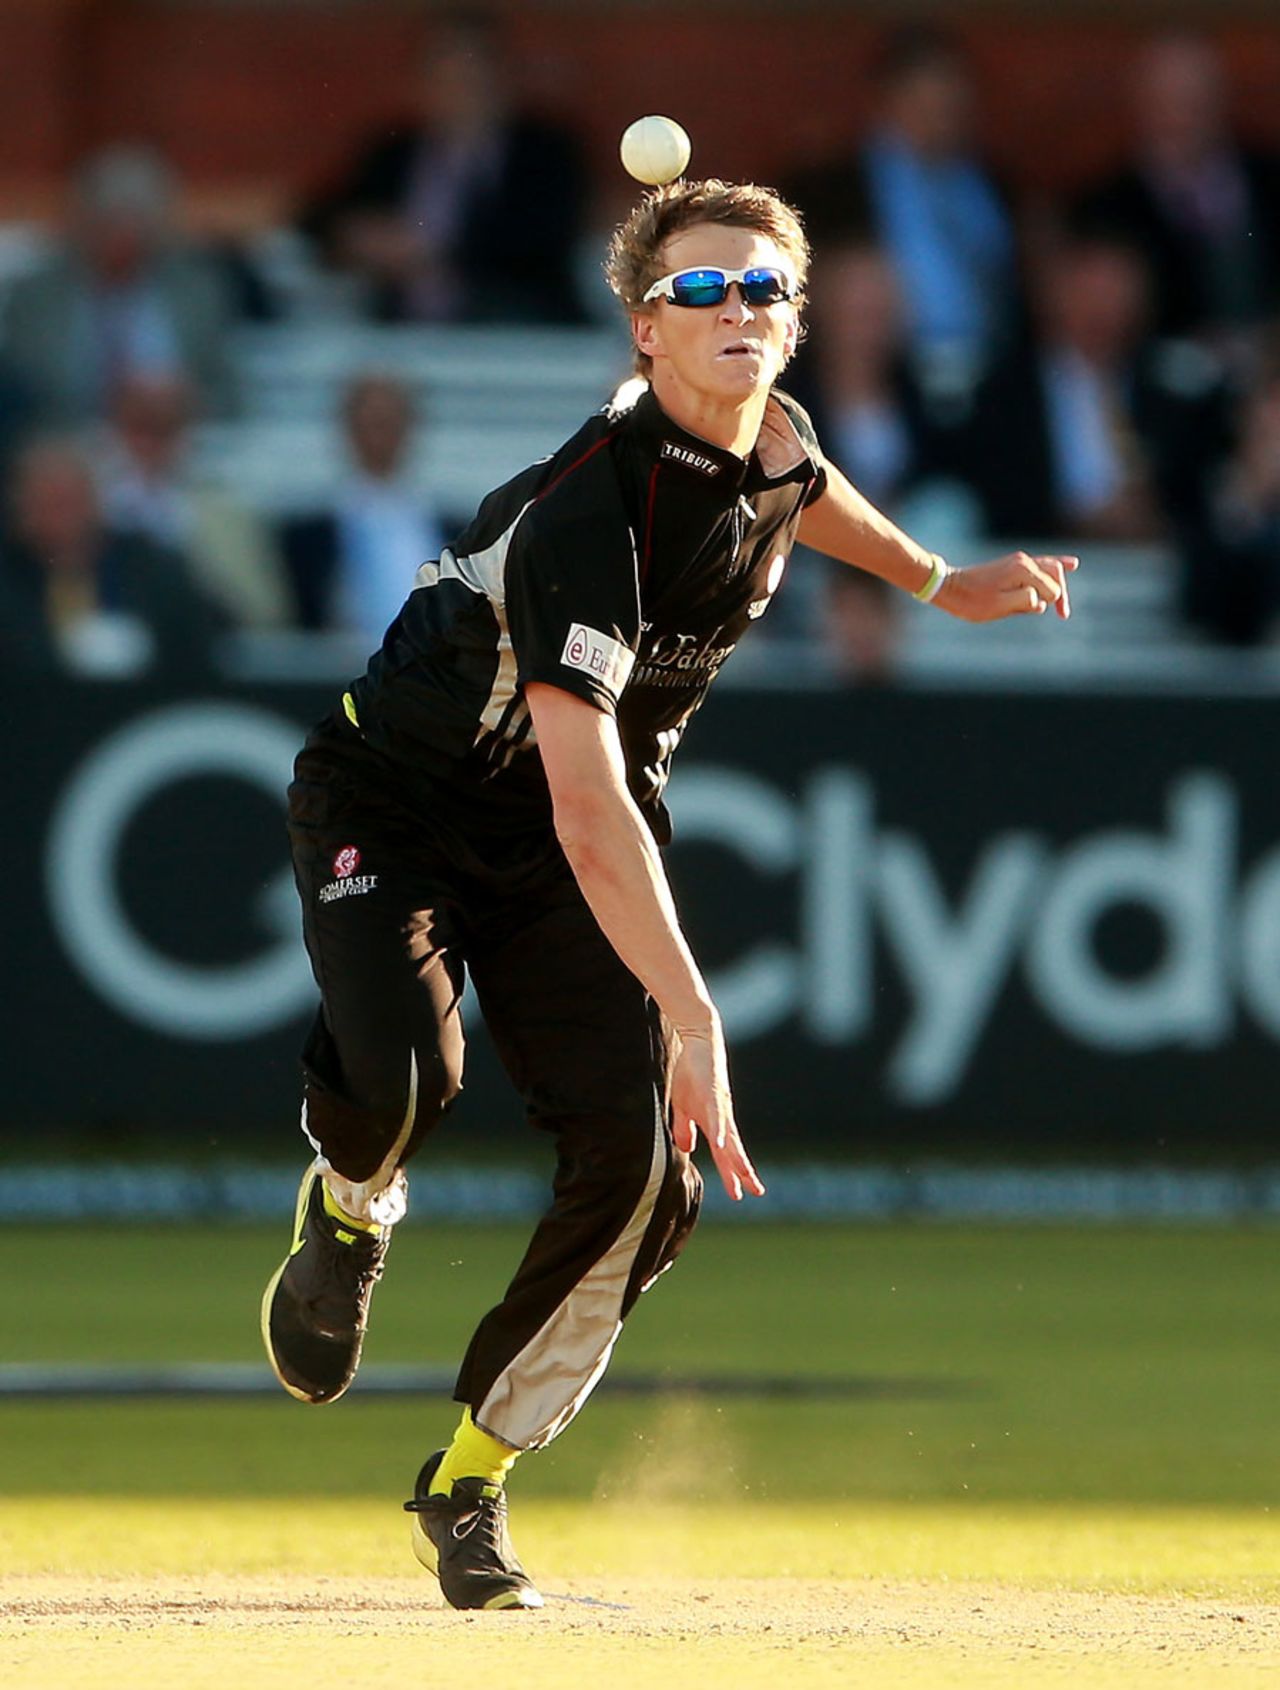 Max Waller removed Joe Denly for 31, Middlesex v Somerset, YB40 Group C, Lord's, June 4, 2013